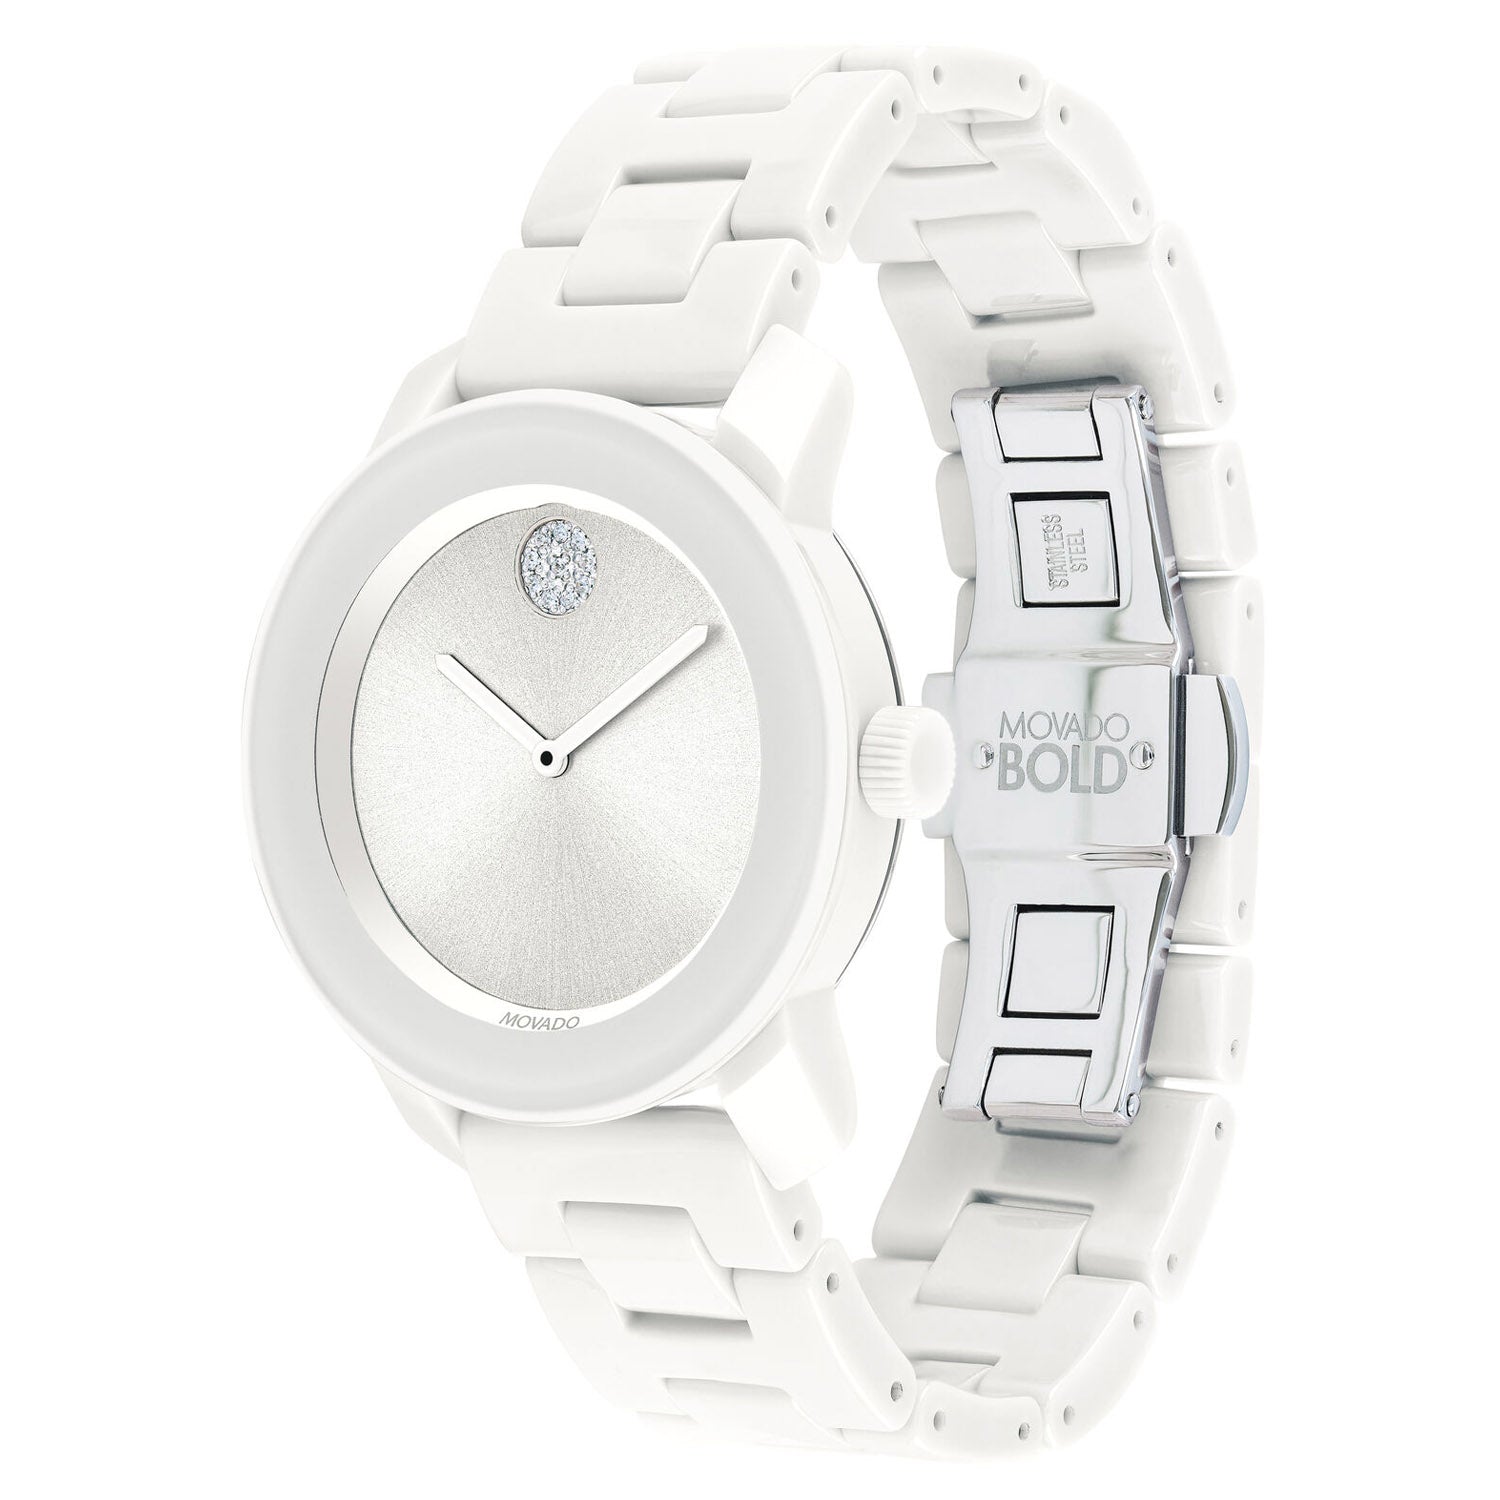 Movado Bold Womens Watch with White Dial and White Ceramic Bracelet (Swiss quart movement)